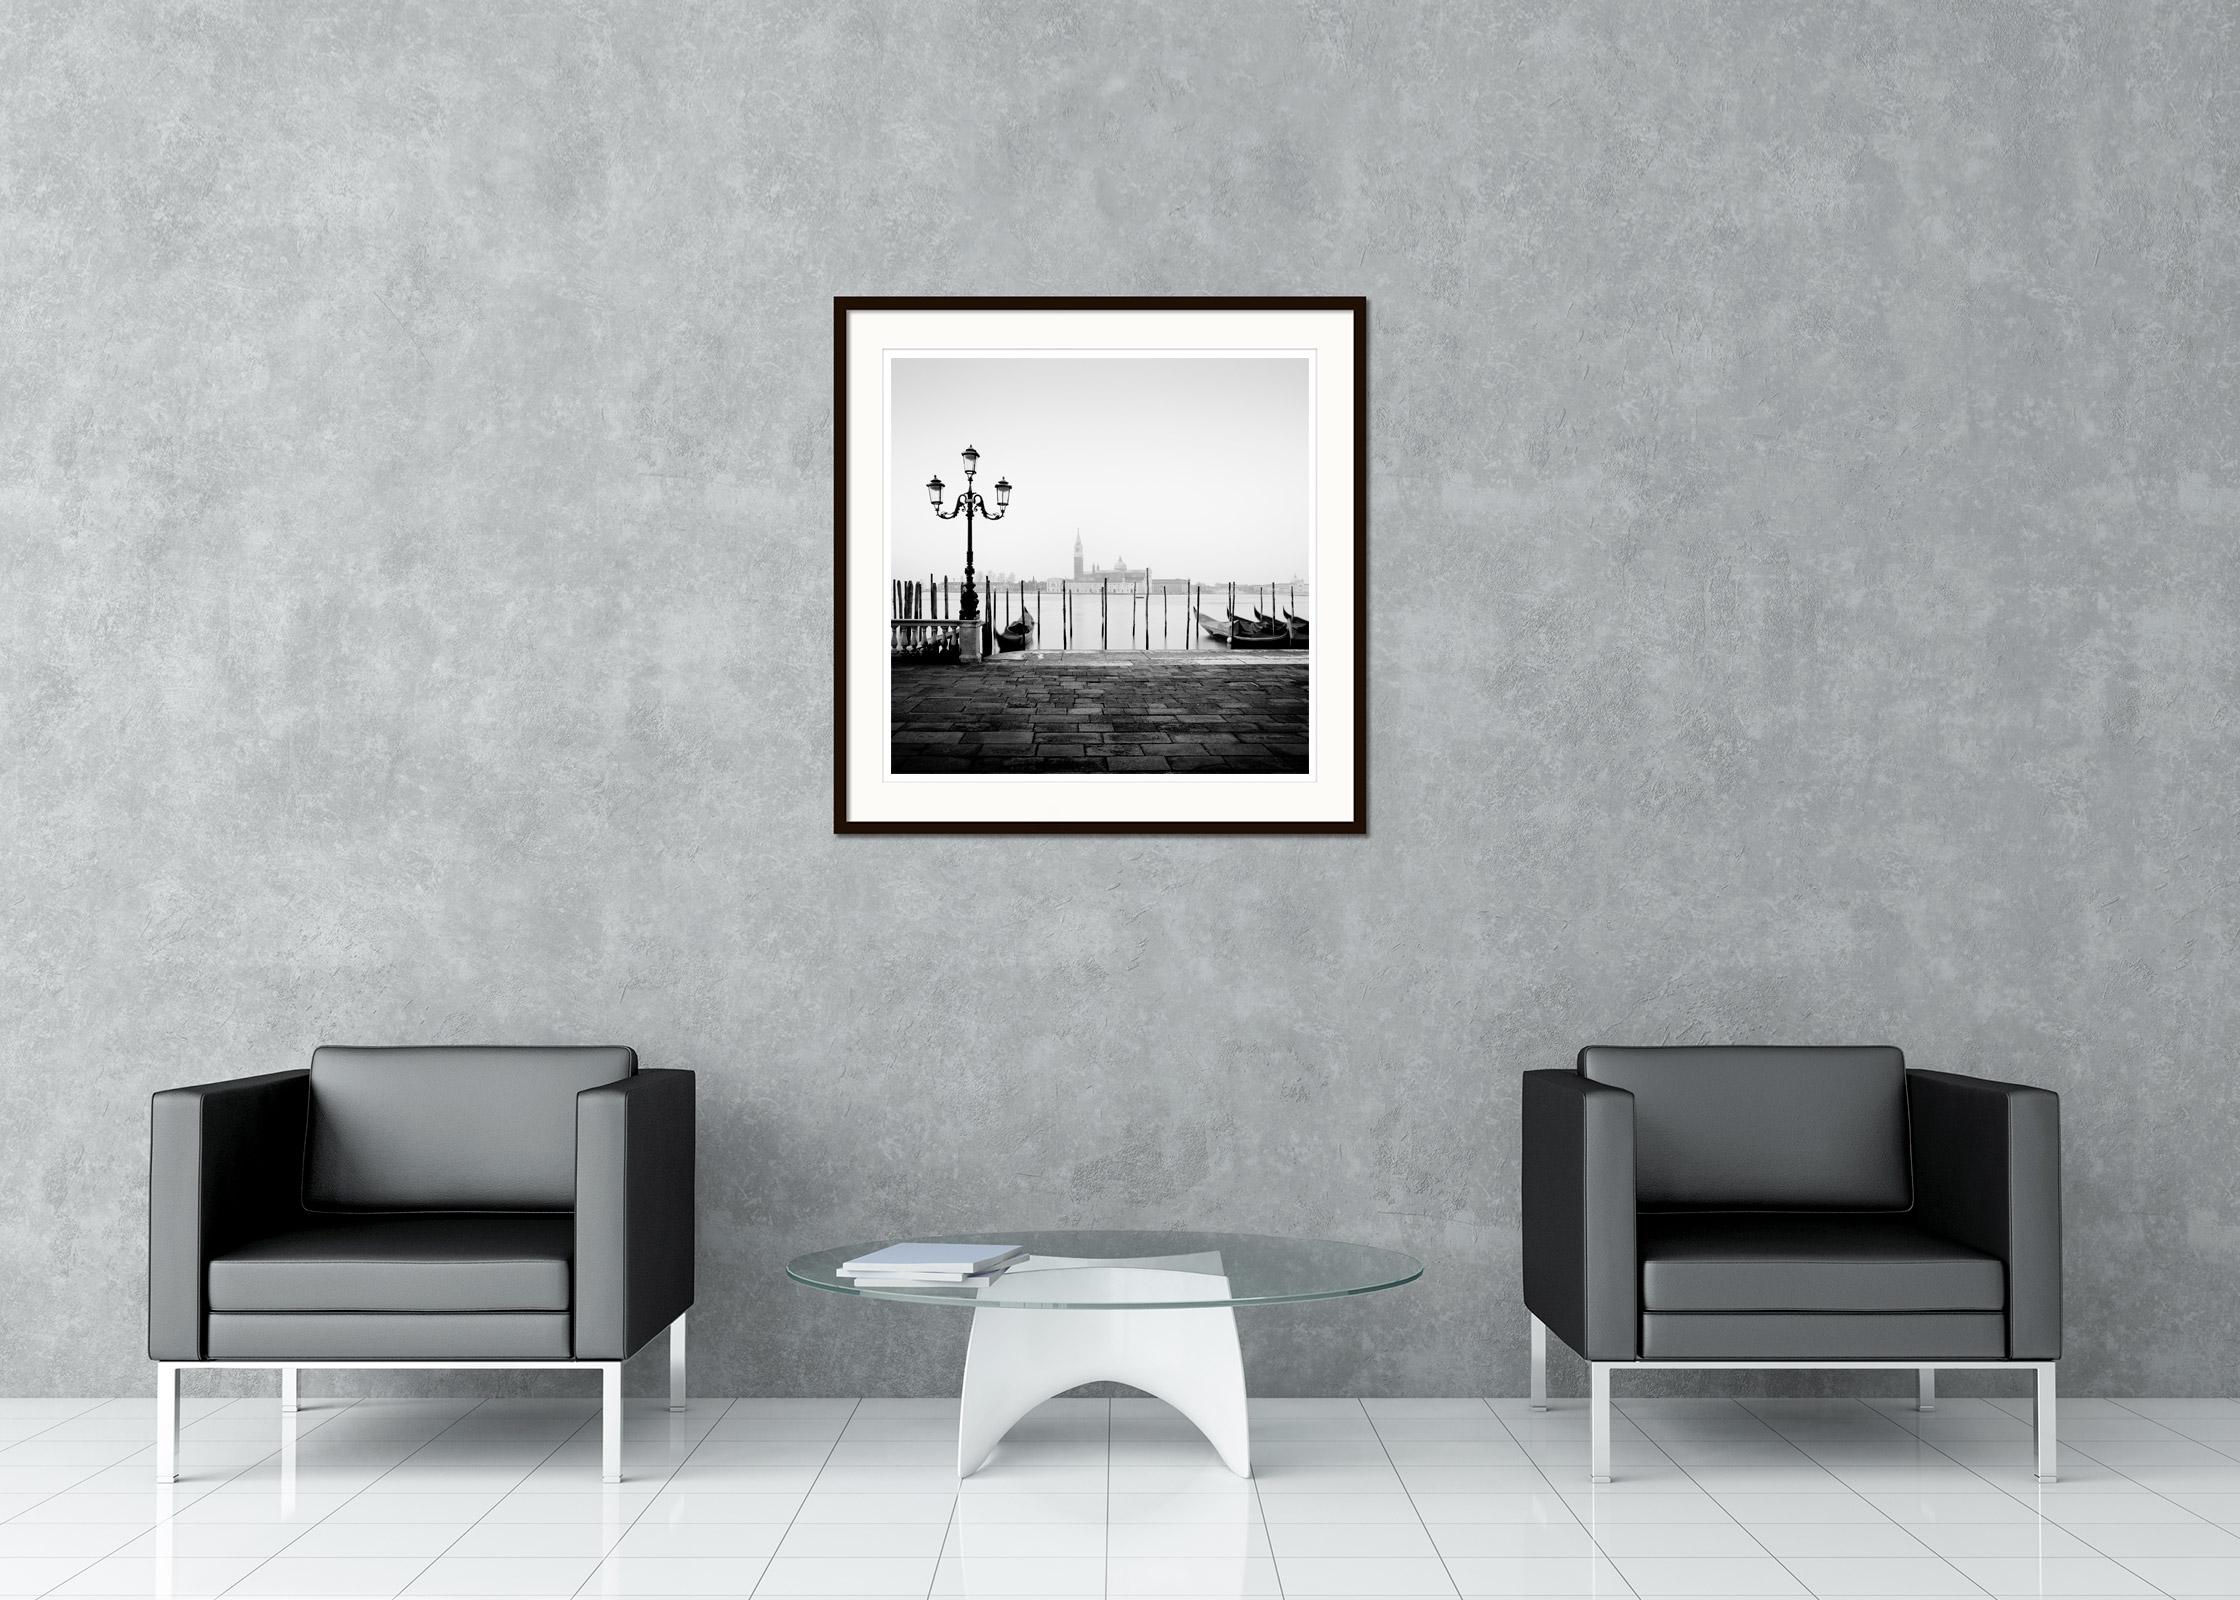 More Free Space Basilica Venice Italy black white fine art landscape photography - Gray Black and White Photograph by Gerald Berghammer